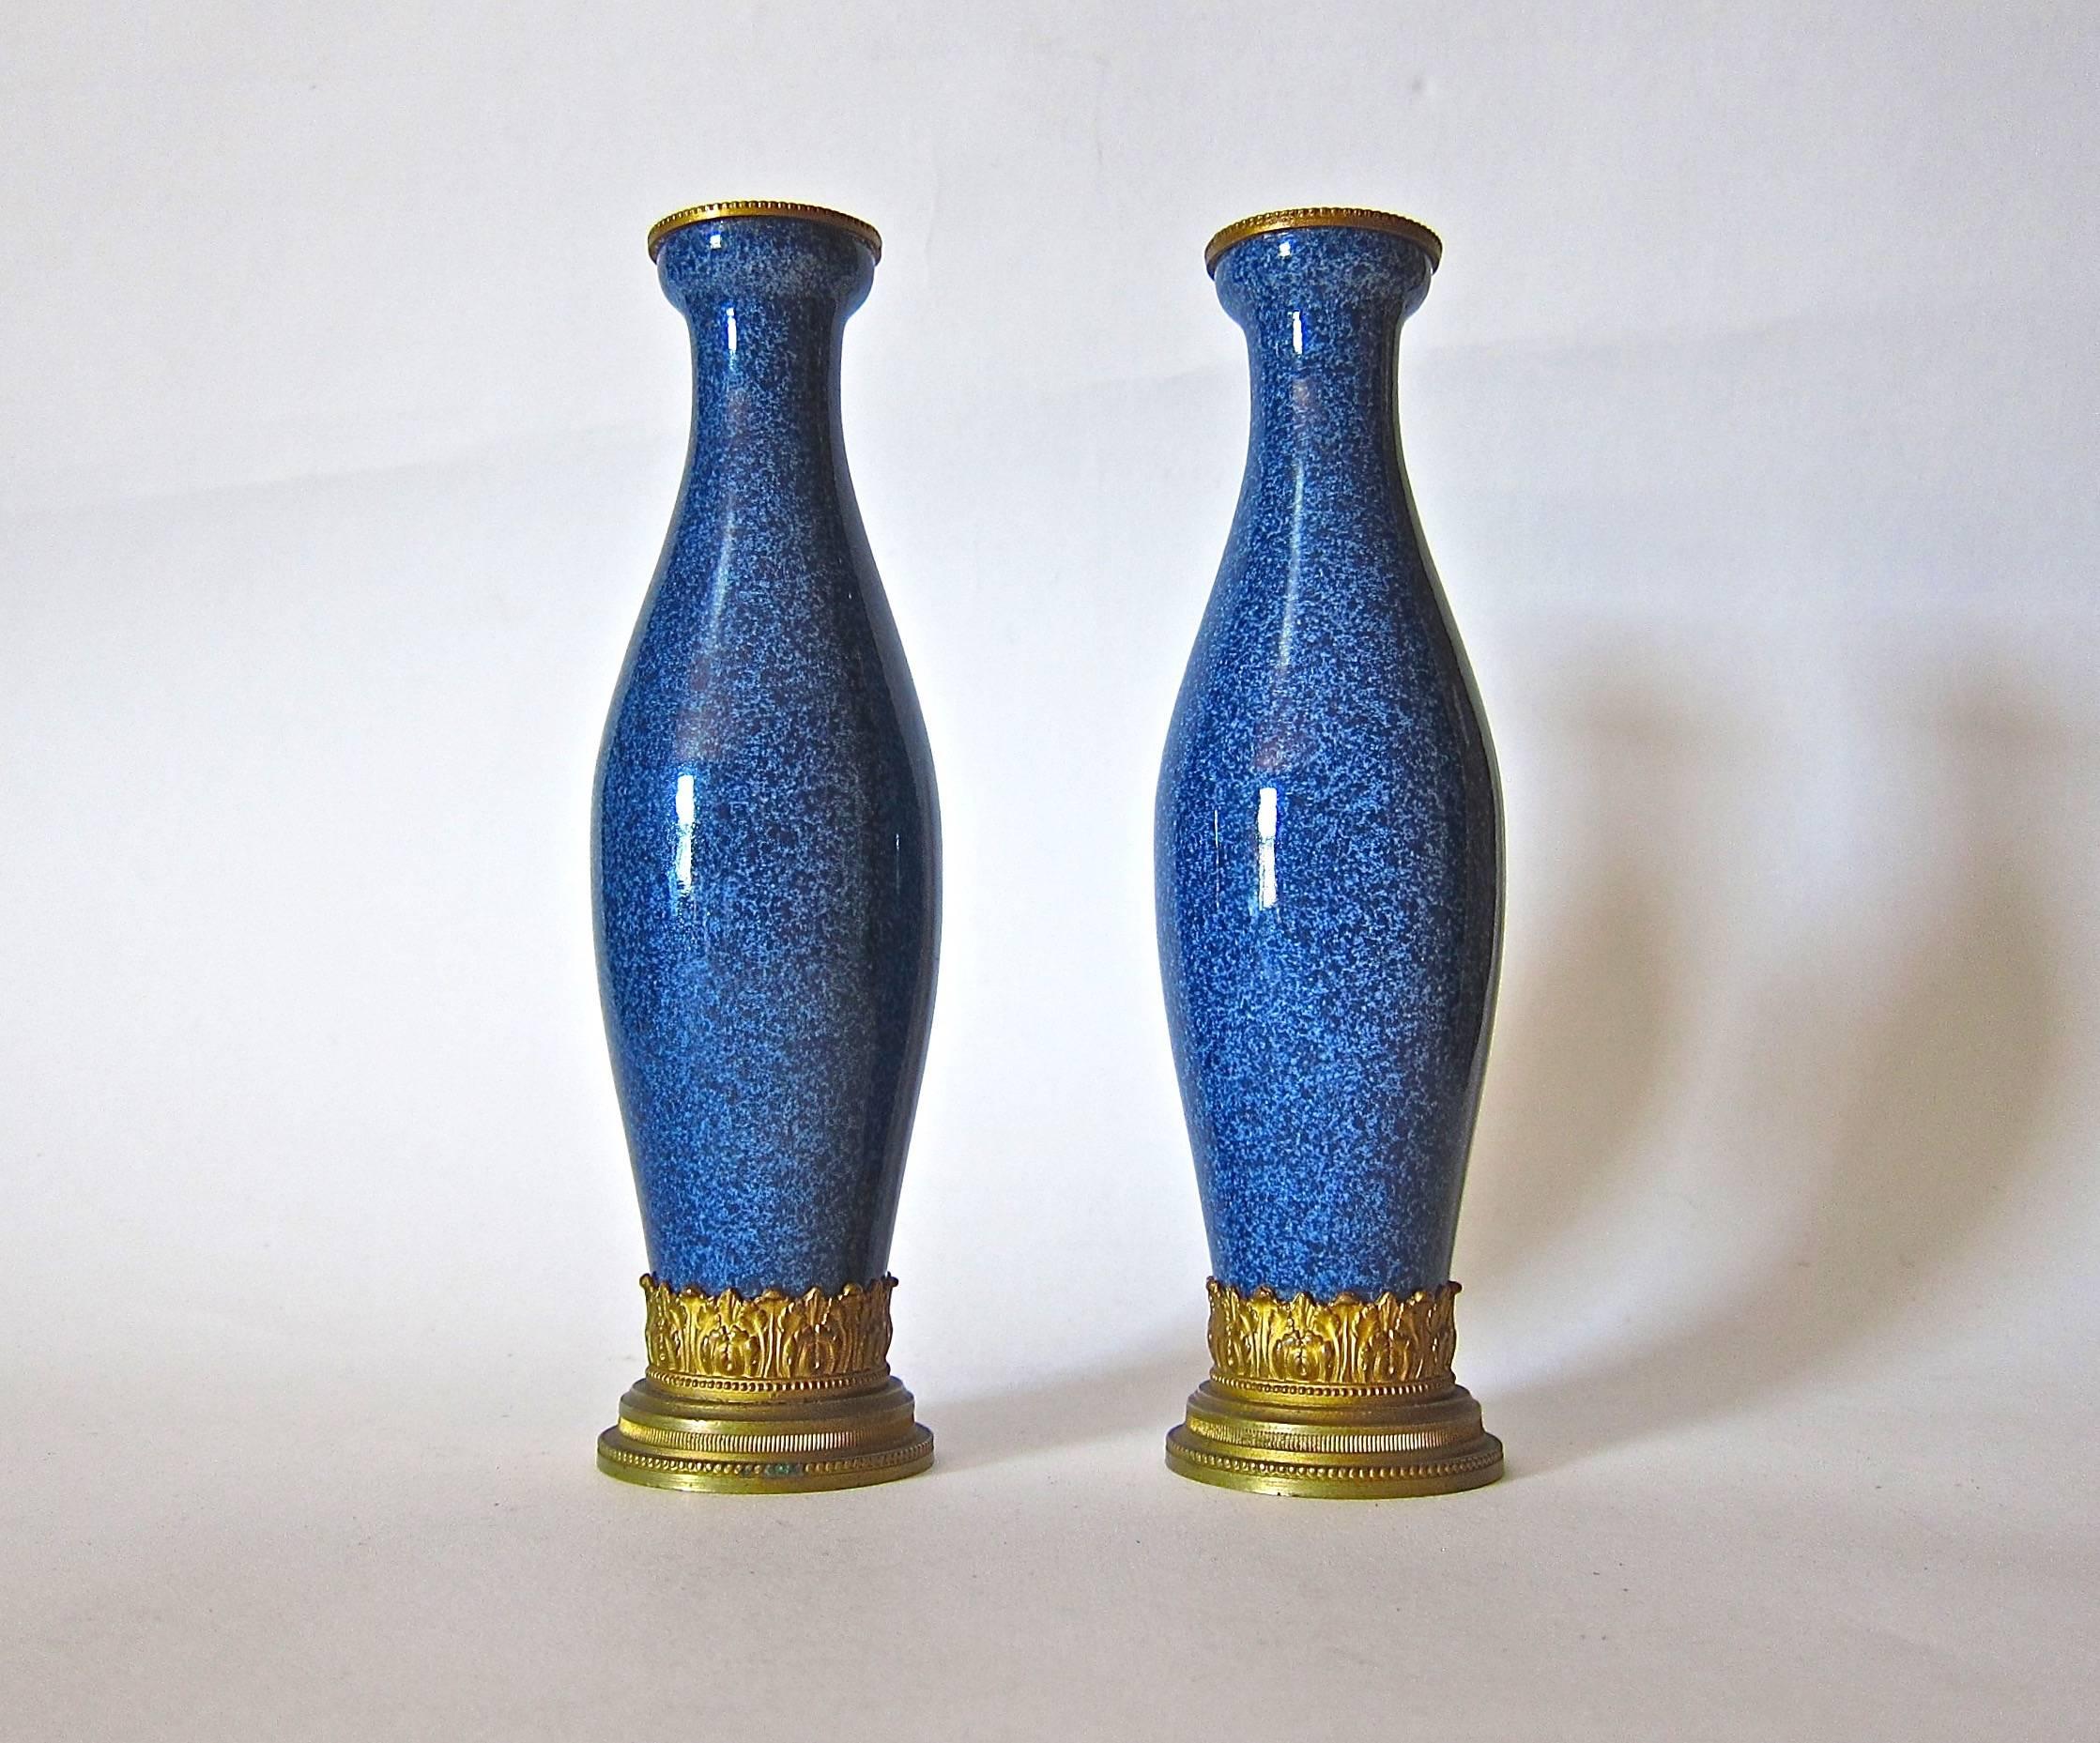 Paul Milet French Faience Vase Pair with Neoclassical Gilt Bronze Mounts 1